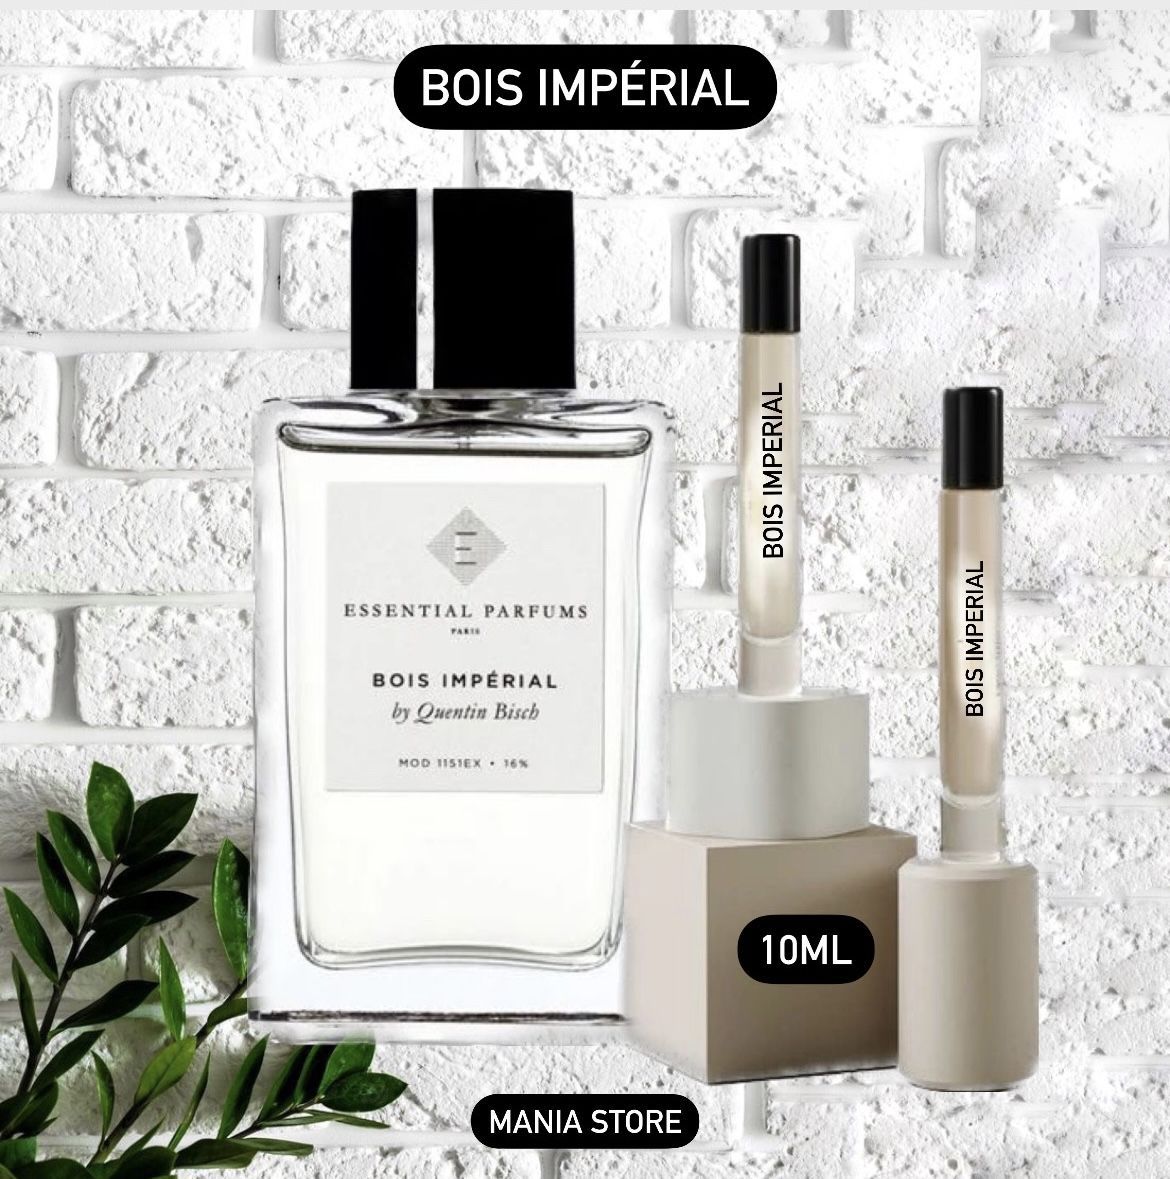 Bois imperial limited. Том Форд Soleil neige. Tom Ford neige. Tom Ford Soleil neige 100ml. Том Форд белые Soleil neige.